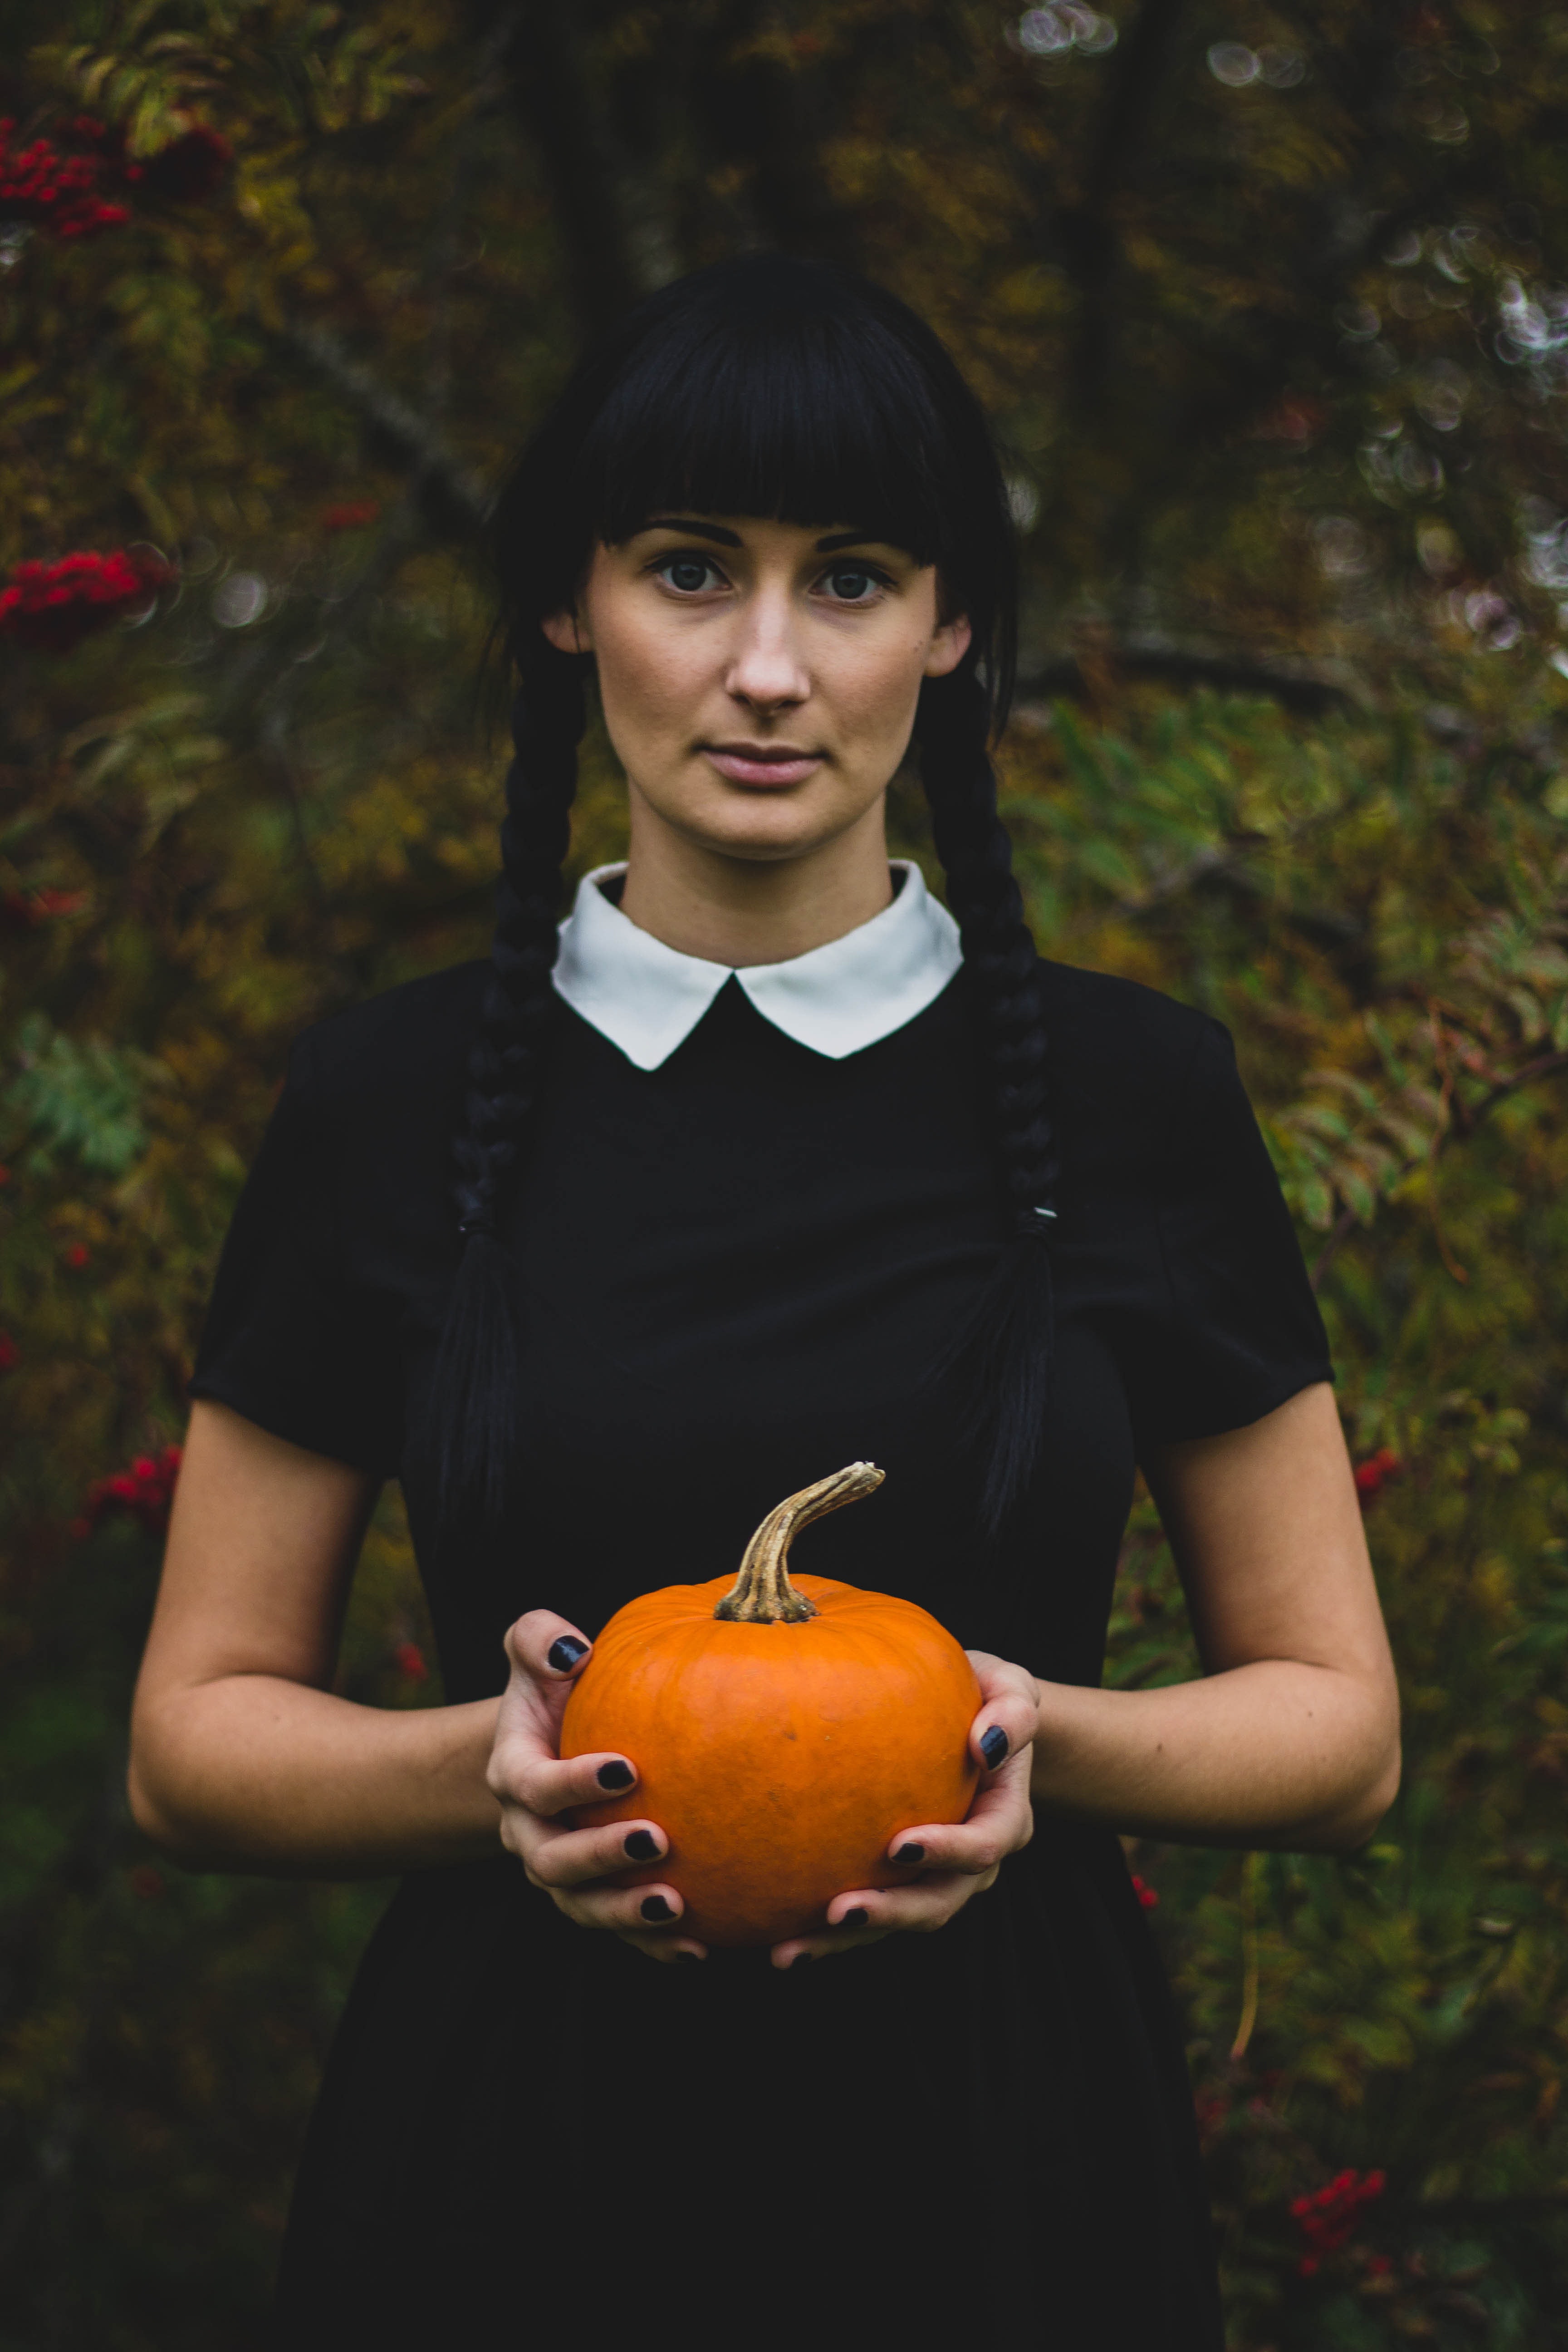 Woman in black and white collared dress holding pumpkin during daytime photo